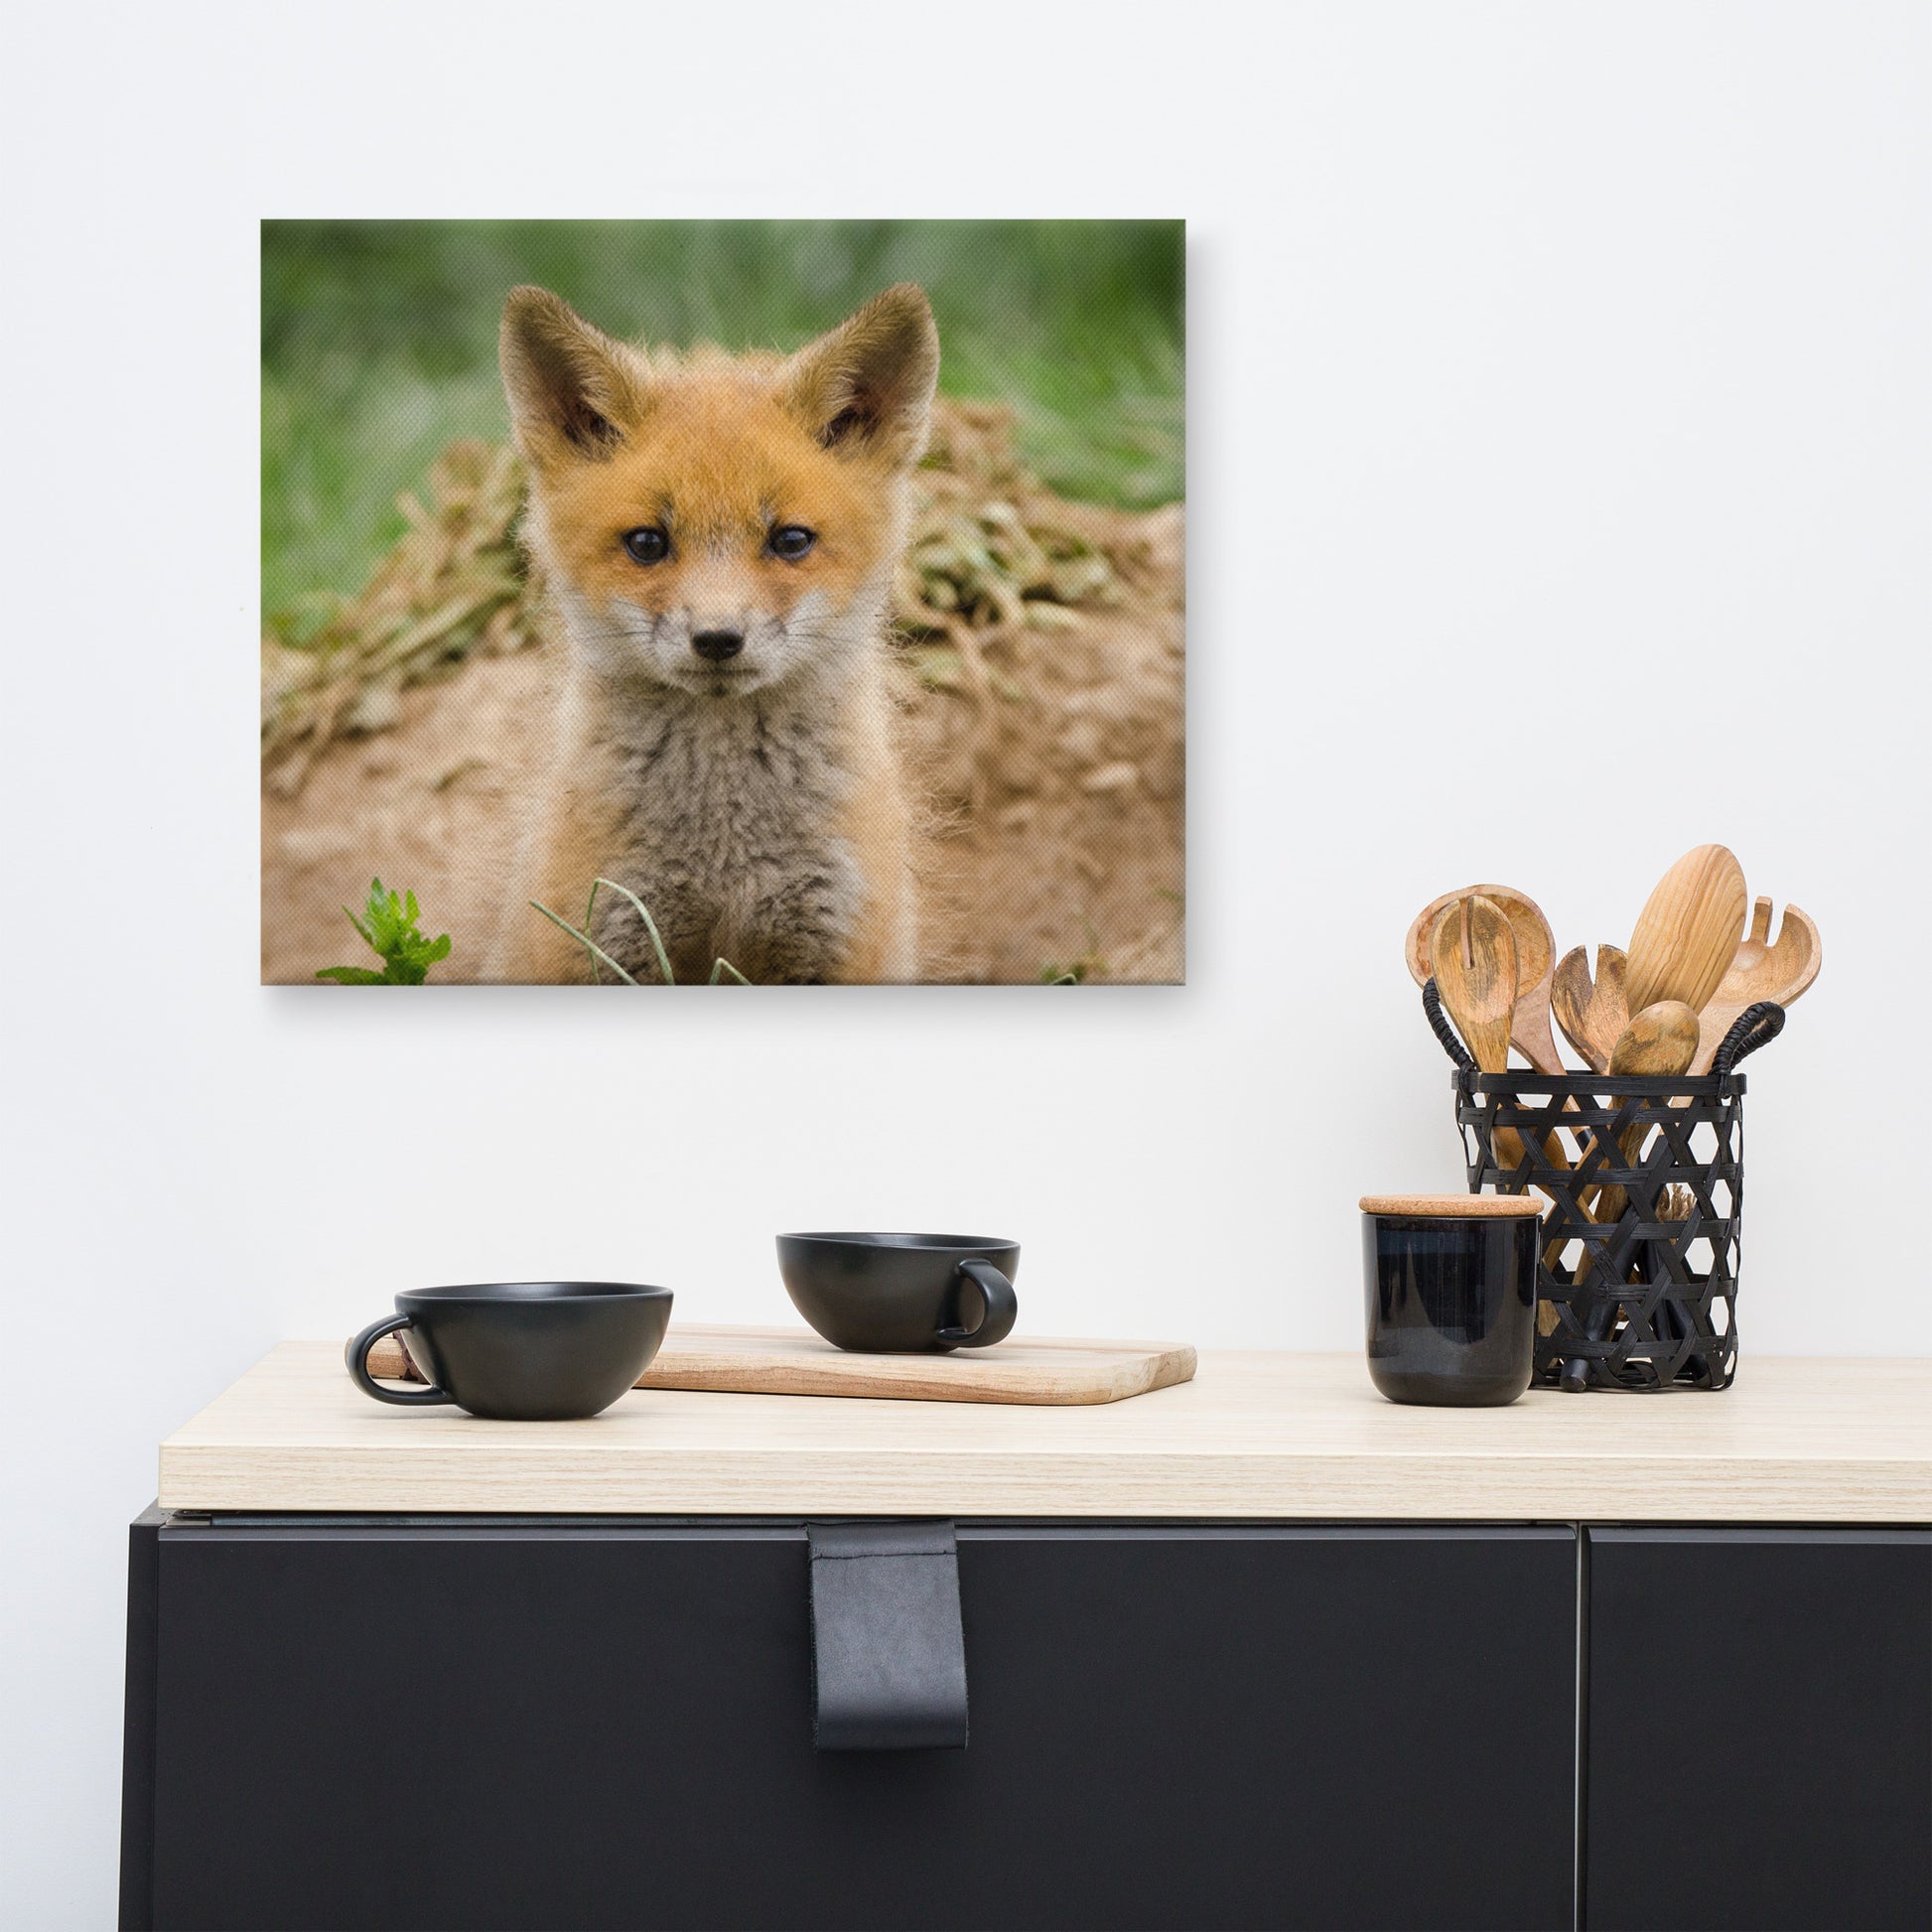 Modern Wall Art For Dining Room: Young Red Fox Kit Popping Out of Den- Wildlife / Animal / Nature Photograph Canvas Wall Art Print - Artwork